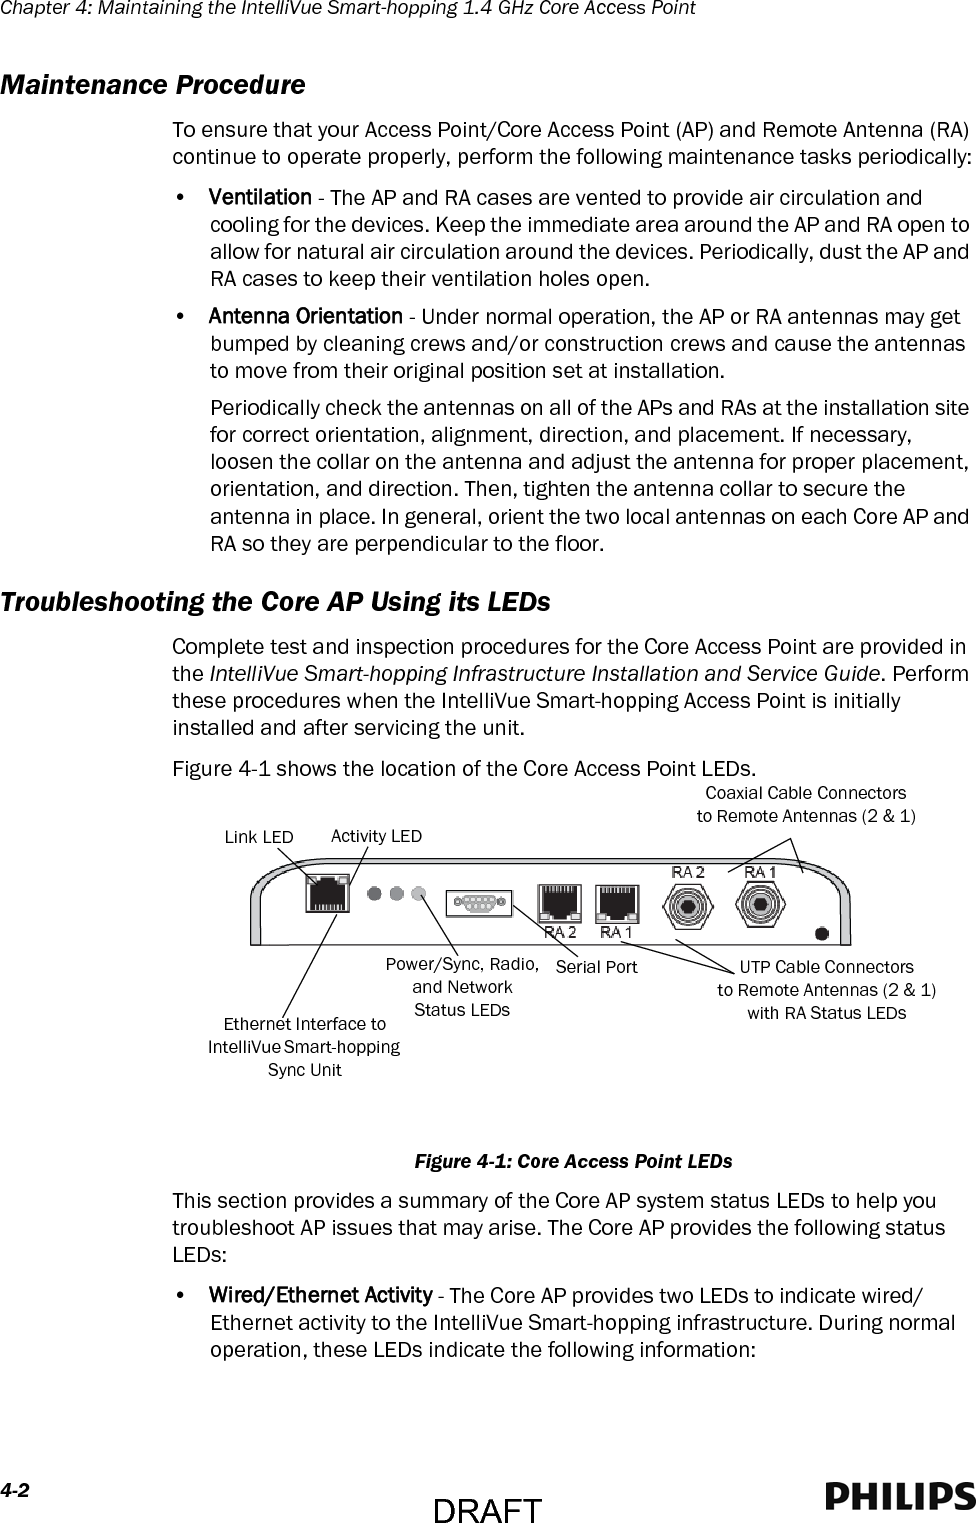 4-2Chapter 4: Maintaining the IntelliVue Smart-hopping 1.4 GHz Core Access PointMaintenance ProcedureTo ensure that your Access Point/Core Access Point (AP) and Remote Antenna (RA) continue to operate properly, perform the following maintenance tasks periodically:•Ventilation - The AP and RA cases are vented to provide air circulation and cooling for the devices. Keep the immediate area around the AP and RA open to allow for natural air circulation around the devices. Periodically, dust the AP and RA cases to keep their ventilation holes open.•Antenna Orientation - Under normal operation, the AP or RA antennas may get bumped by cleaning crews and/or construction crews and cause the antennas to move from their original position set at installation.Periodically check the antennas on all of the APs and RAs at the installation site for correct orientation, alignment, direction, and placement. If necessary, loosen the collar on the antenna and adjust the antenna for proper placement, orientation, and direction. Then, tighten the antenna collar to secure the antenna in place. In general, orient the two local antennas on each Core AP and RA so they are perpendicular to the floor.Troubleshooting the Core AP Using its LEDsComplete test and inspection procedures for the Core Access Point are provided in the IntelliVue Smart-hopping Infrastructure Installation and Service Guide. Perform these procedures when the IntelliVue Smart-hopping Access Point is initially installed and after servicing the unit.Figure 4-1 shows the location of the Core Access Point LEDs.Figure 4-1: Core Access Point LEDsThis section provides a summary of the Core AP system status LEDs to help you troubleshoot AP issues that may arise. The Core AP provides the following status LEDs:•Wired/Ethernet Activity - The Core AP provides two LEDs to indicate wired/Ethernet activity to the IntelliVue Smart-hopping infrastructure. During normal operation, these LEDs indicate the following information:Power/Sync, Radio,and NetworkStatus LEDsSerial Port UTP Cable Connectors to Remote Antennas (2 &amp; 1)with RA Status LEDsCoaxial Cable Connectorsto Remote Antennas (2 &amp; 1)Link LED Activity LEDEthernet Interface toIntelliVue Smart-hopping Sync UnitDRAFT